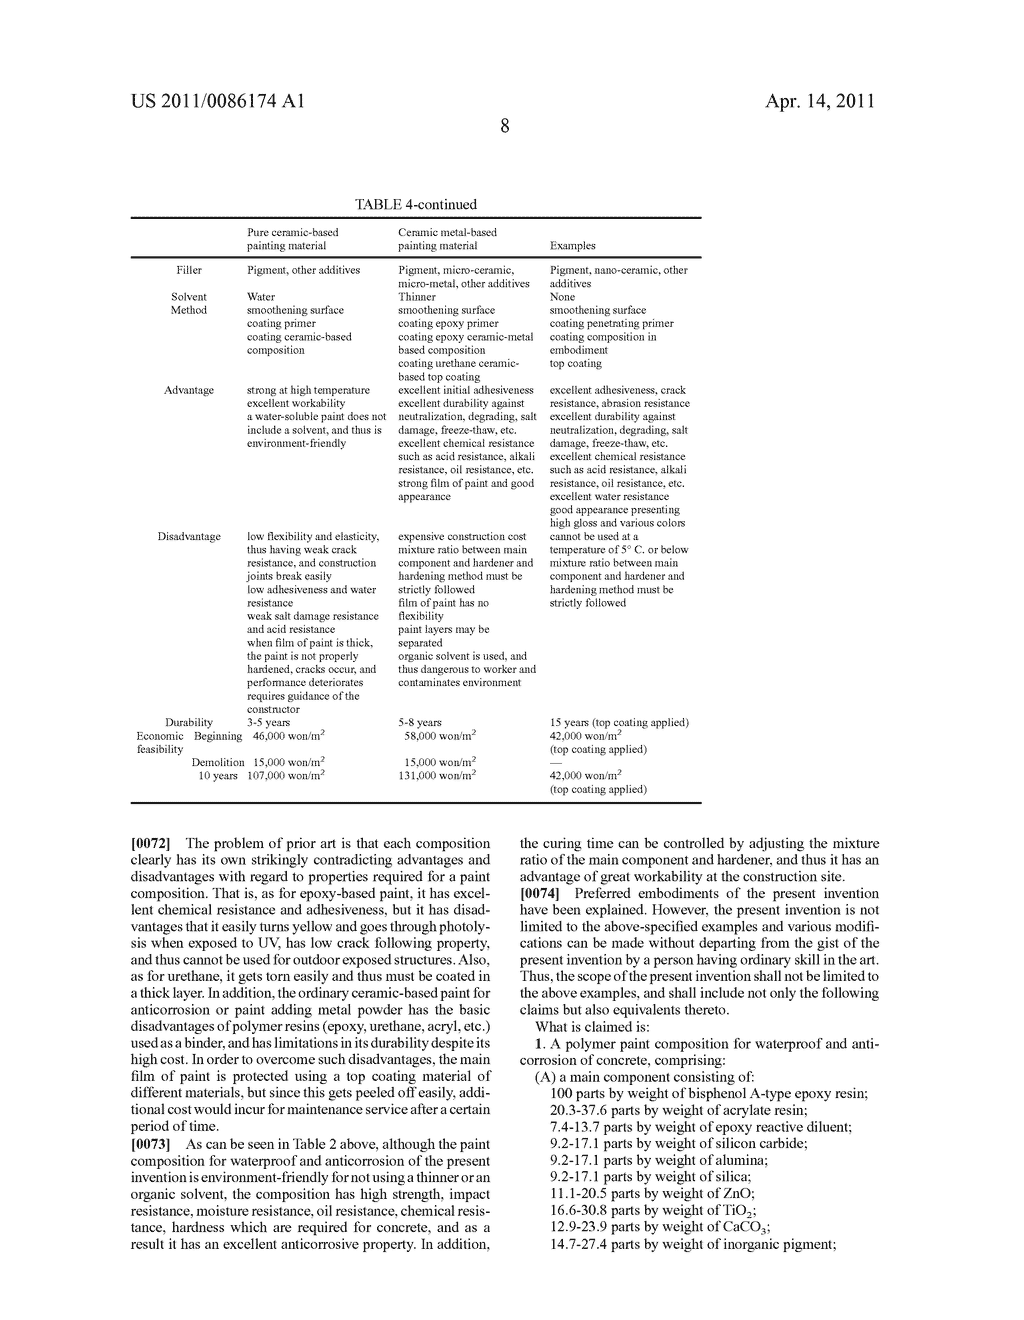 PAINT COMPOSITION INCLUDING NANO-CERAMIC AND POLYMER RESIN AGAINST NEUTRALIZATION AND SALT DAMAGE OF CONCRETE AND METHOD FOR WATERPROOF AND ANTICORROSION USING THE SAME - diagram, schematic, and image 09